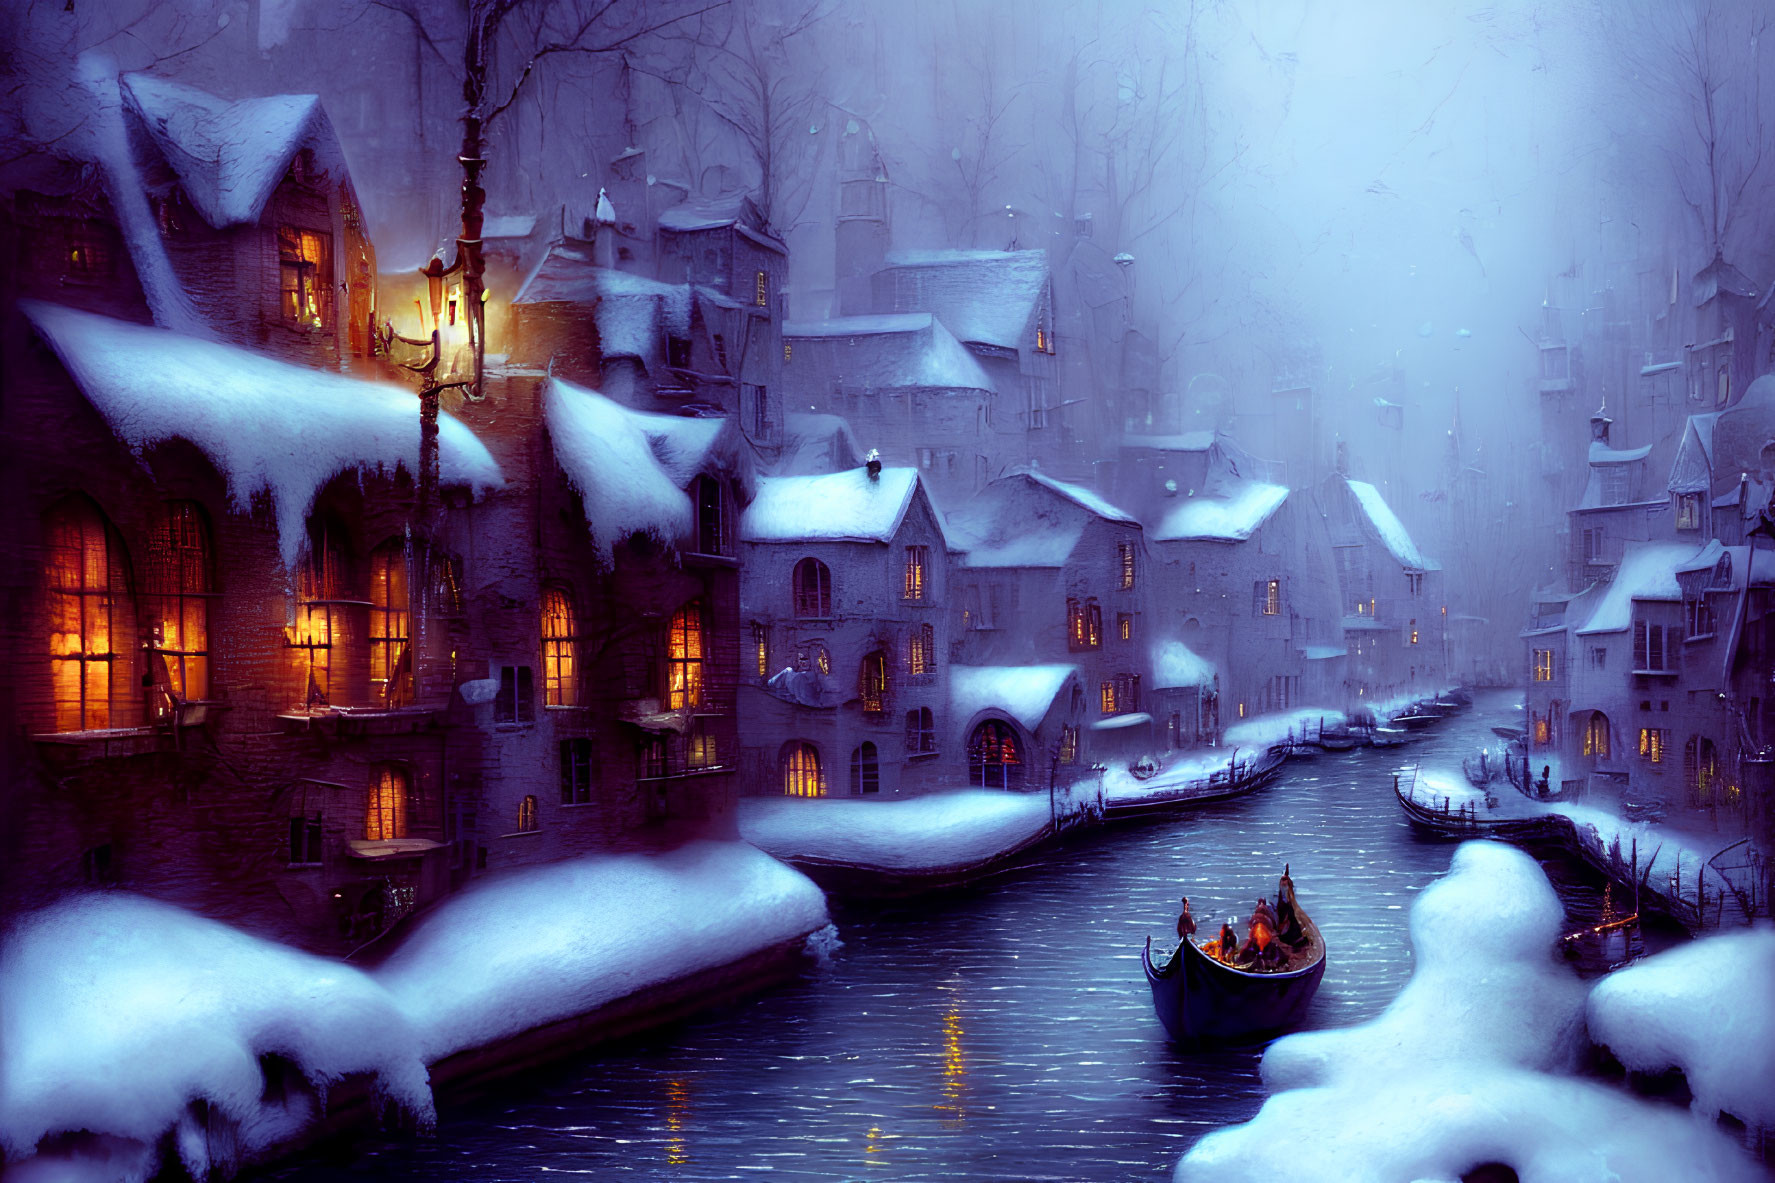 Snow-covered medieval buildings and canal in enchanting winter scene